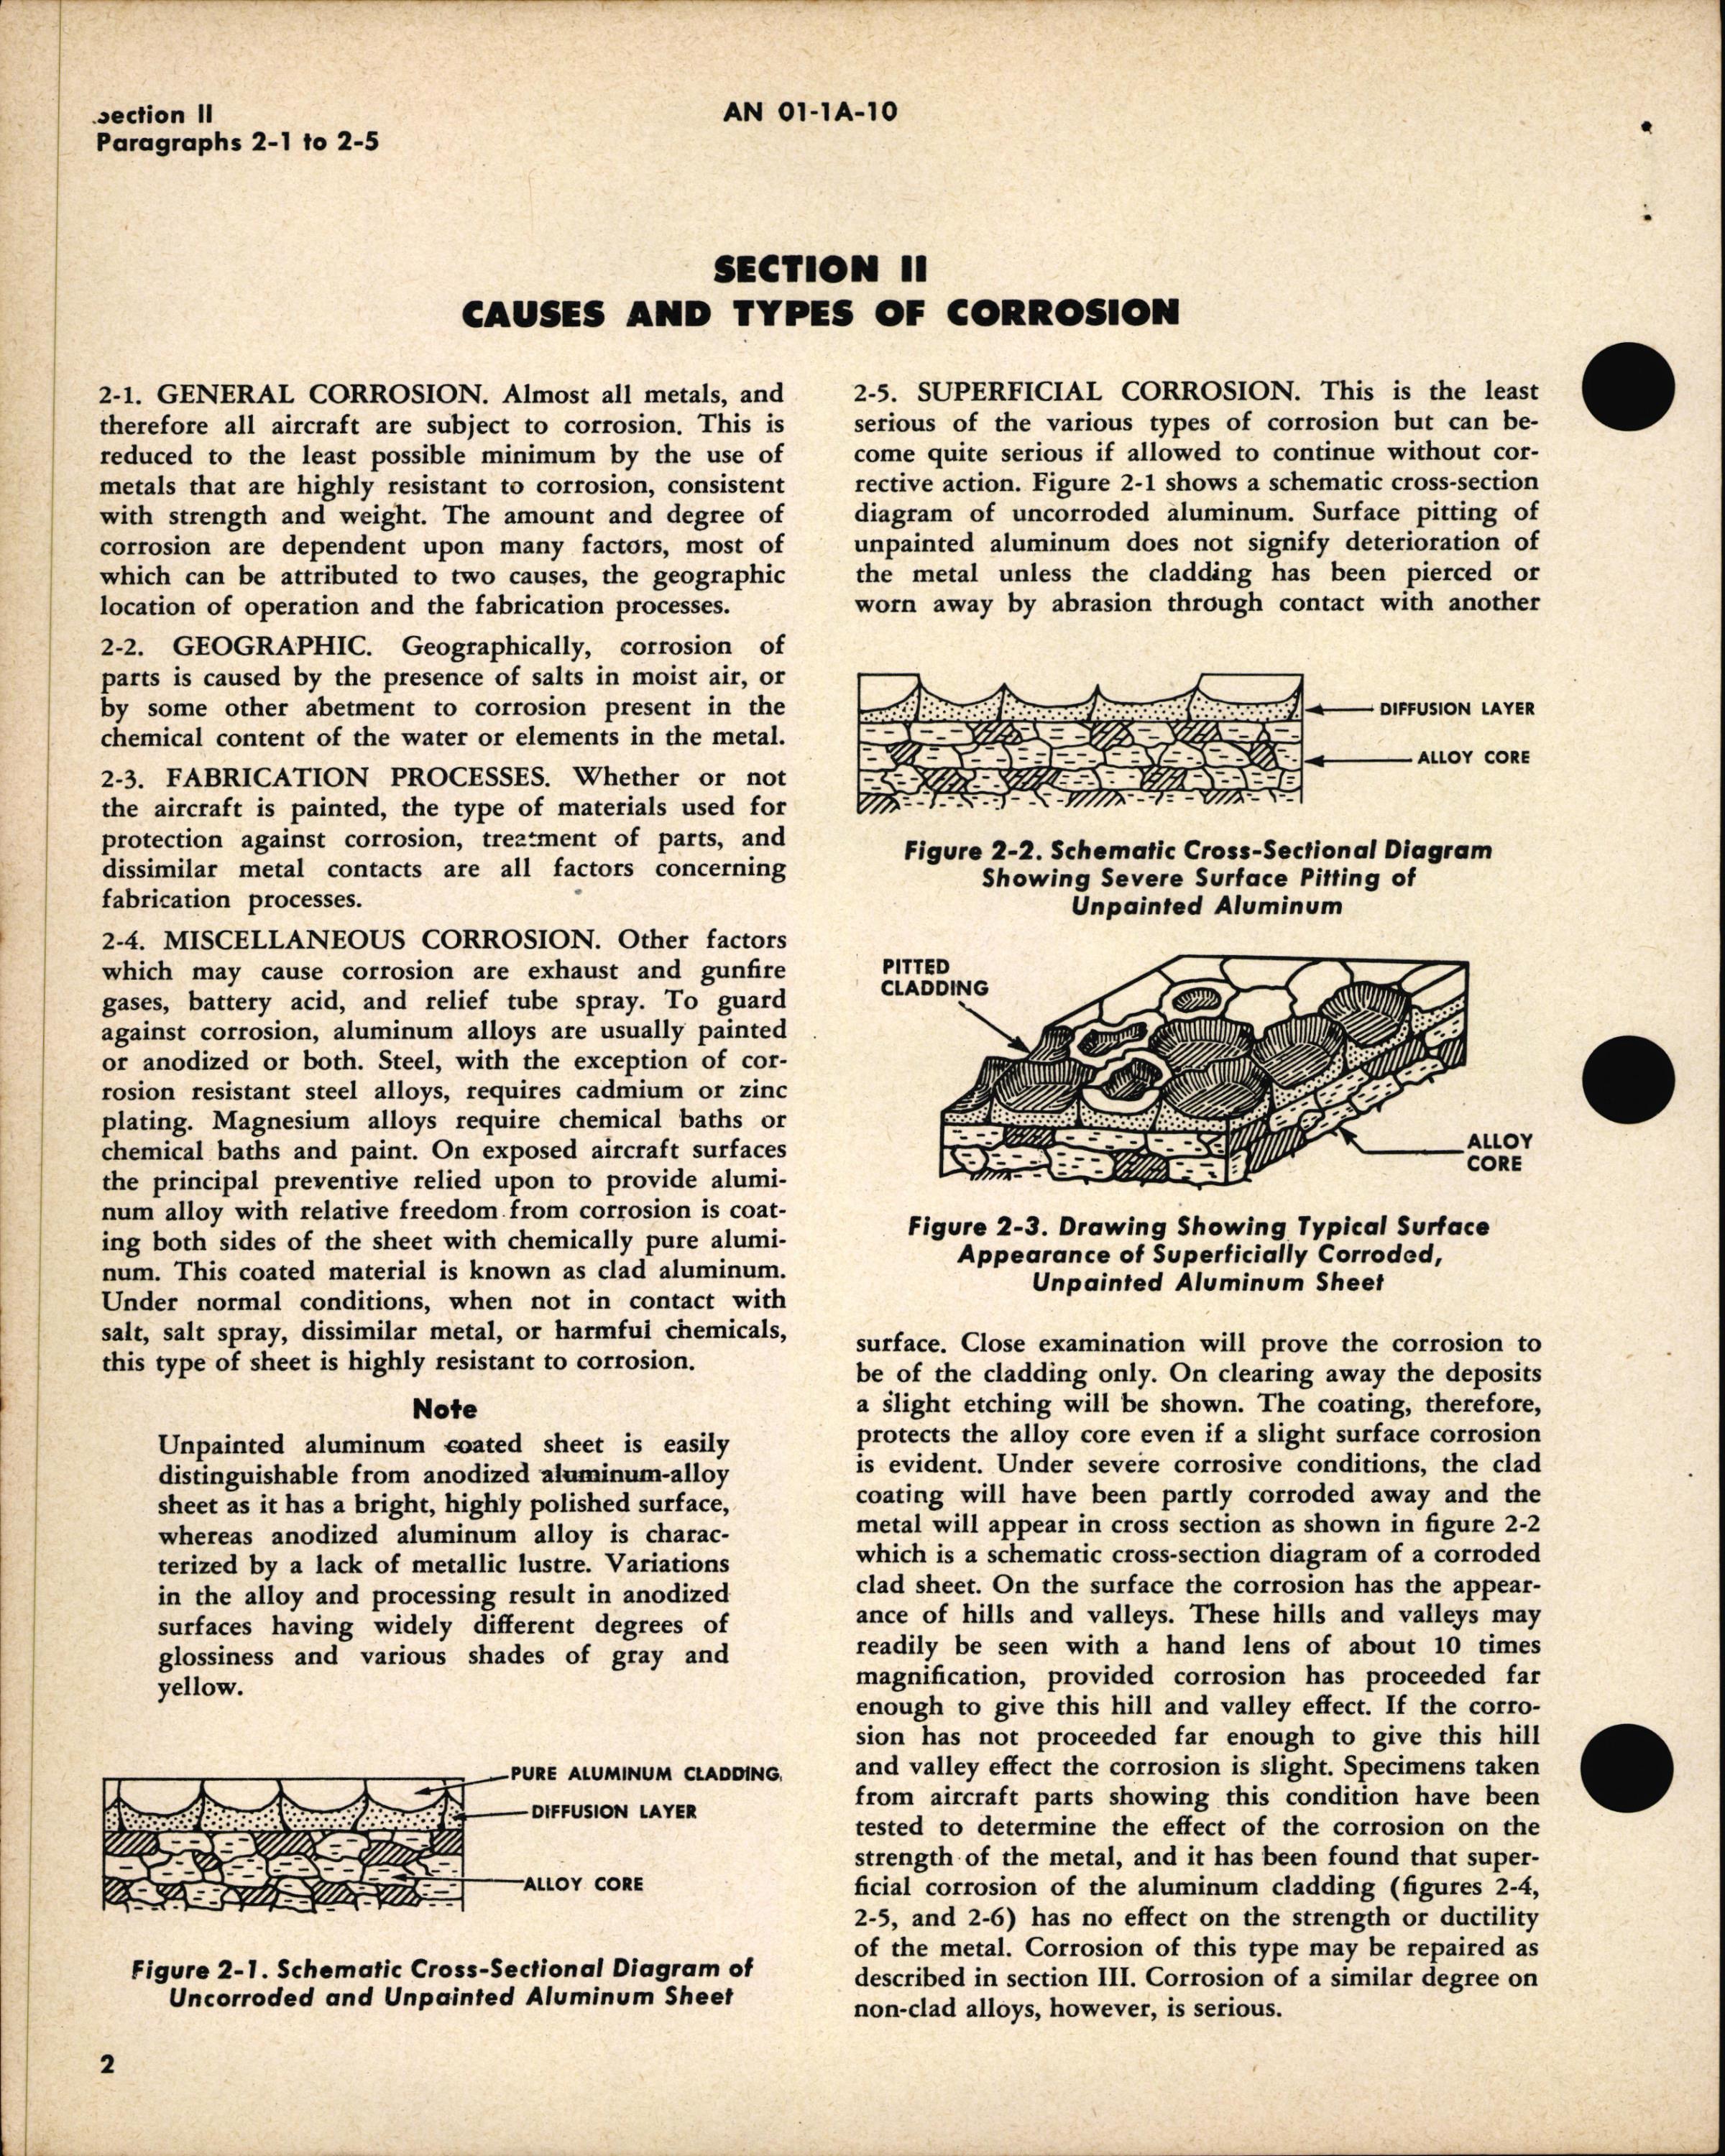 Sample page 6 from AirCorps Library document: Corrosion Control for Aircraft